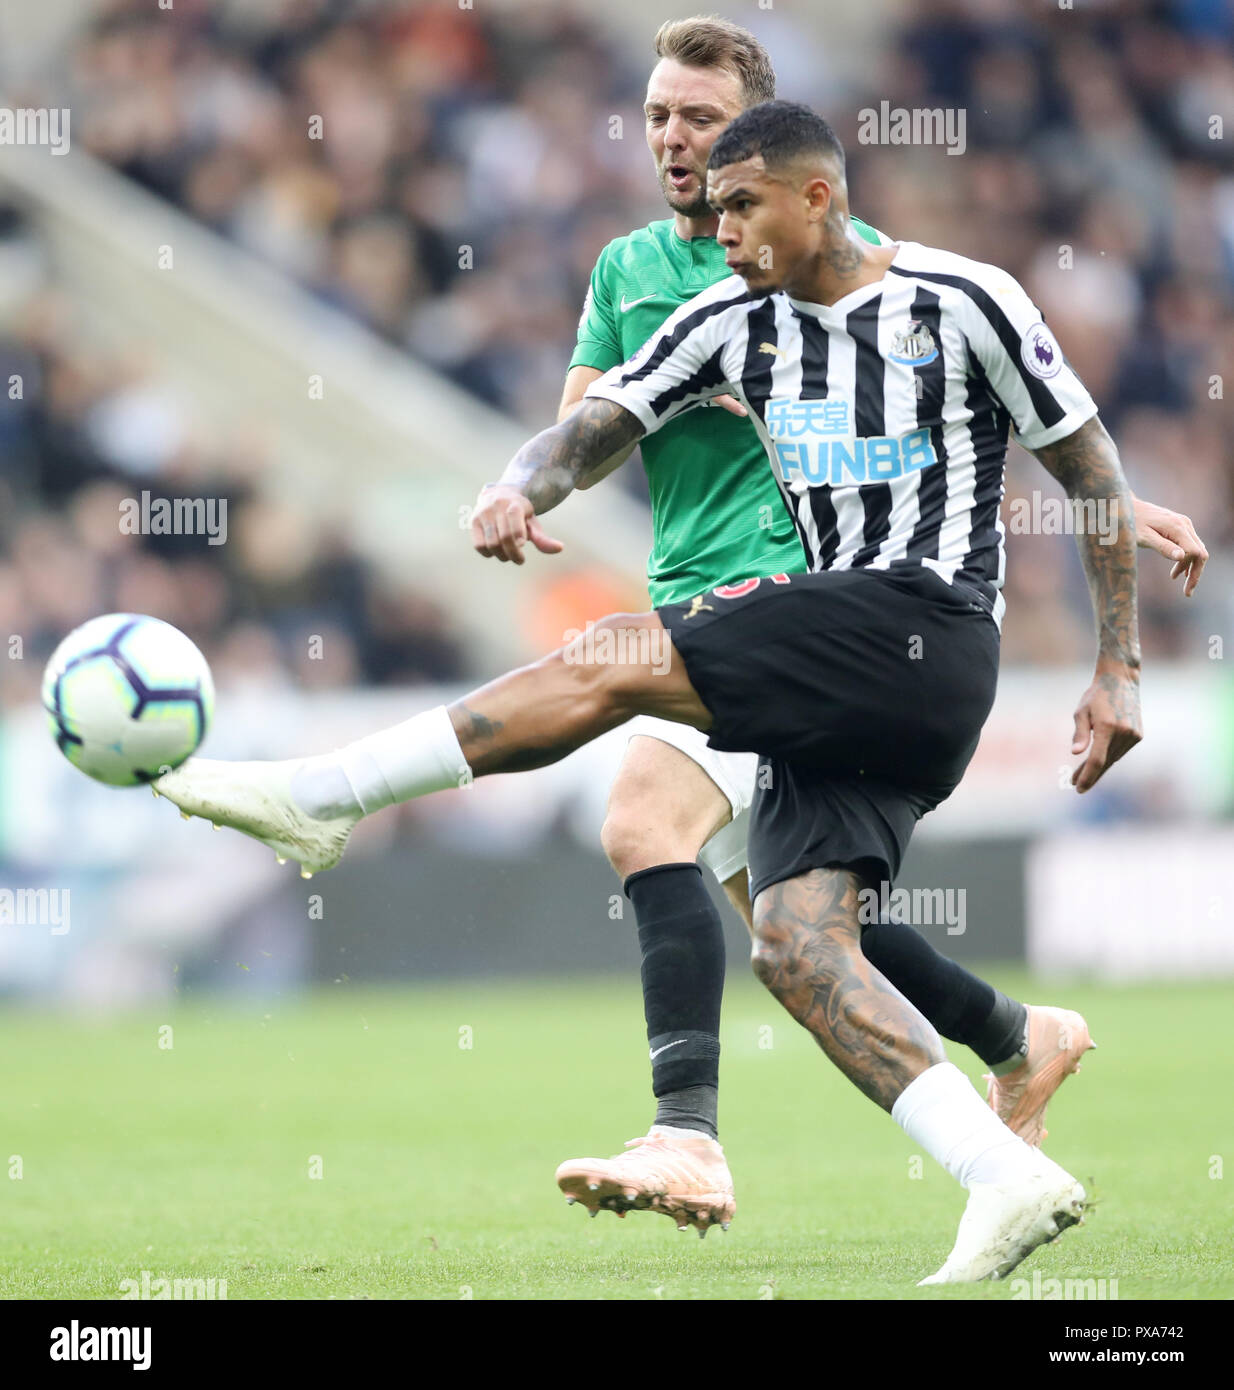 Brighton & Hove Albion's Dale Stephens (left) and Newcastle United's Kenedy battle for the ball during the Premier League match at St James' Park, Newcastle. Stock Photo